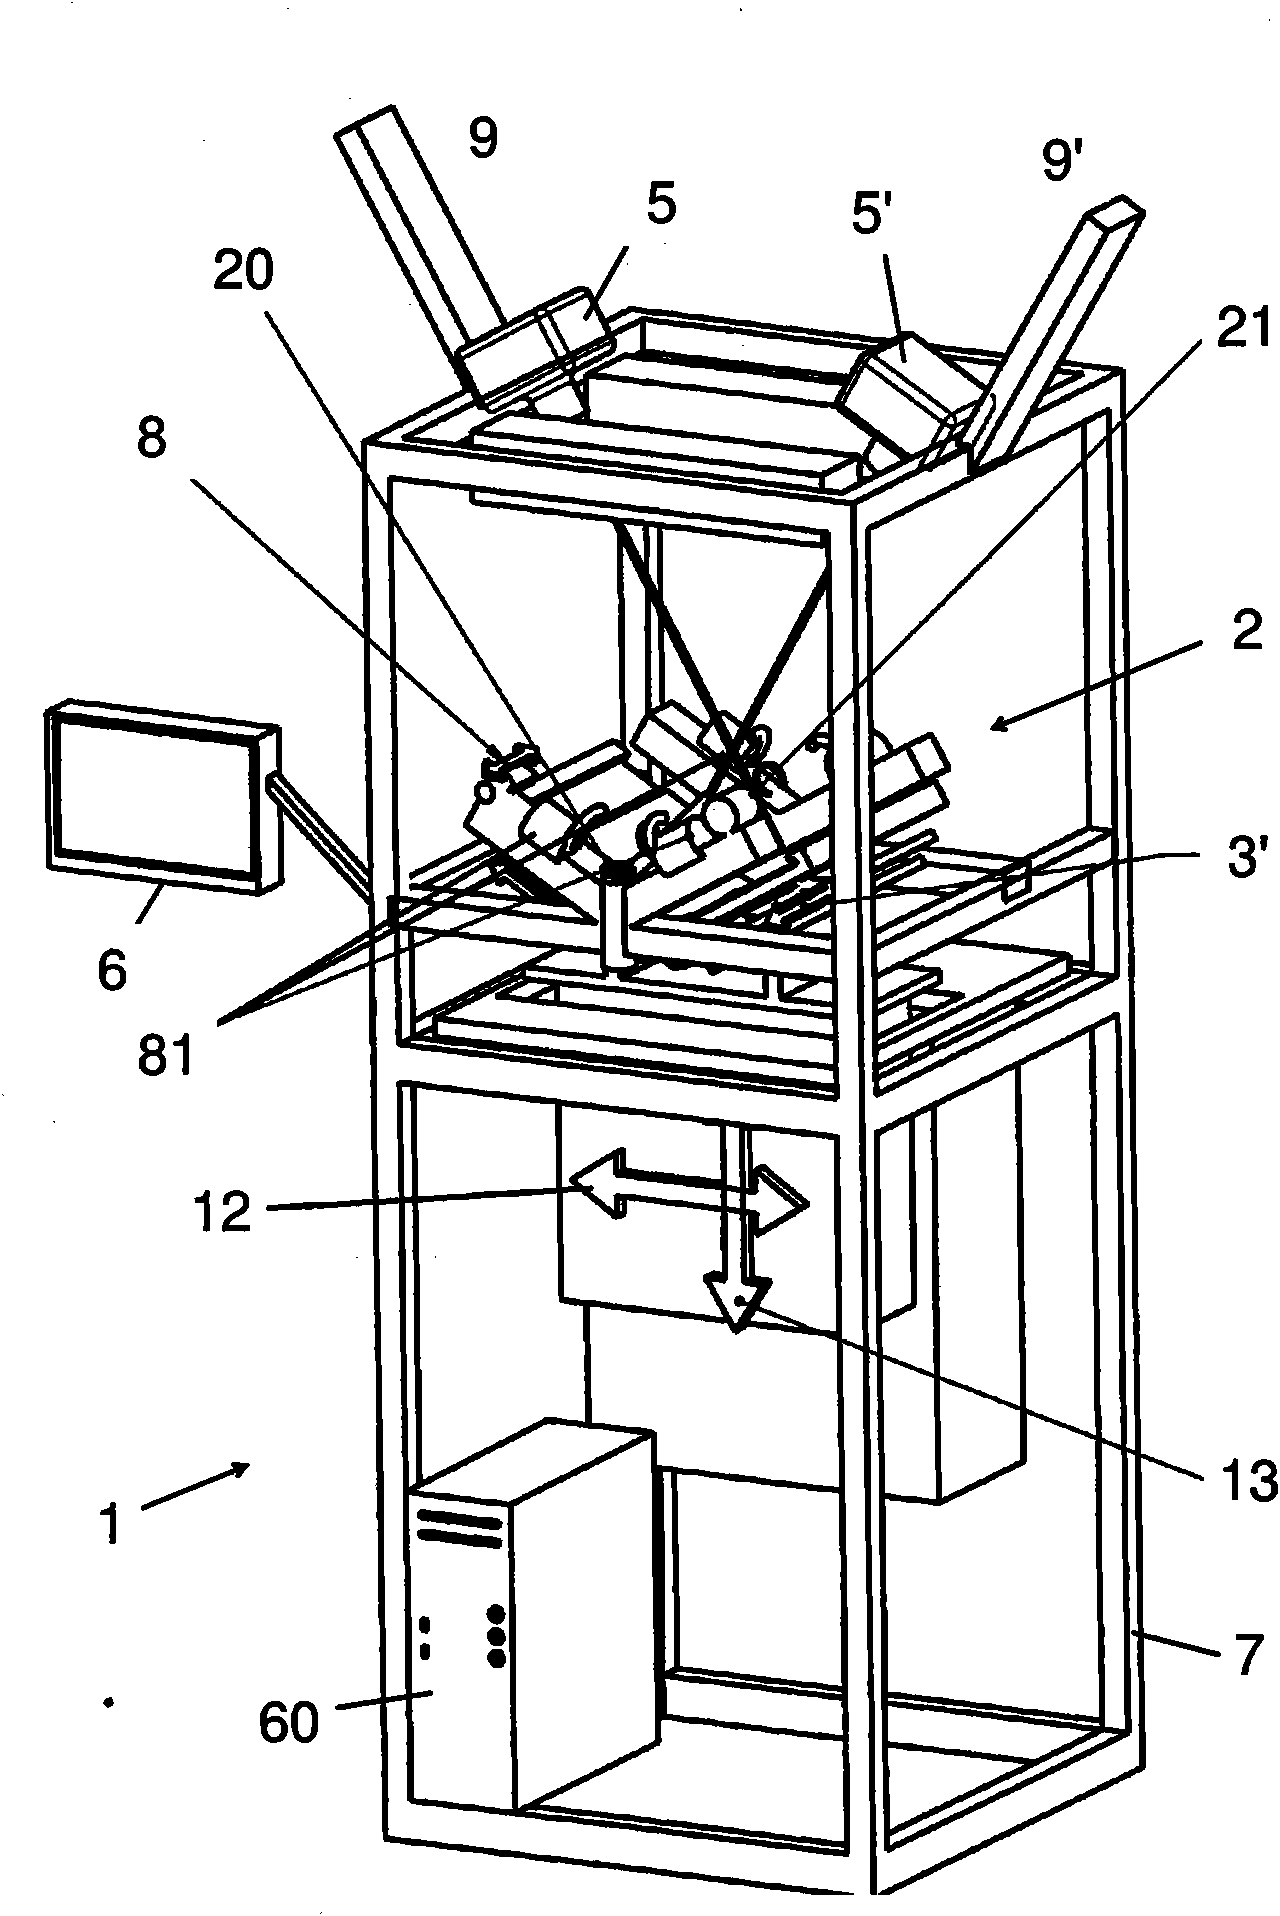 Apparatus for detecting the content of a book